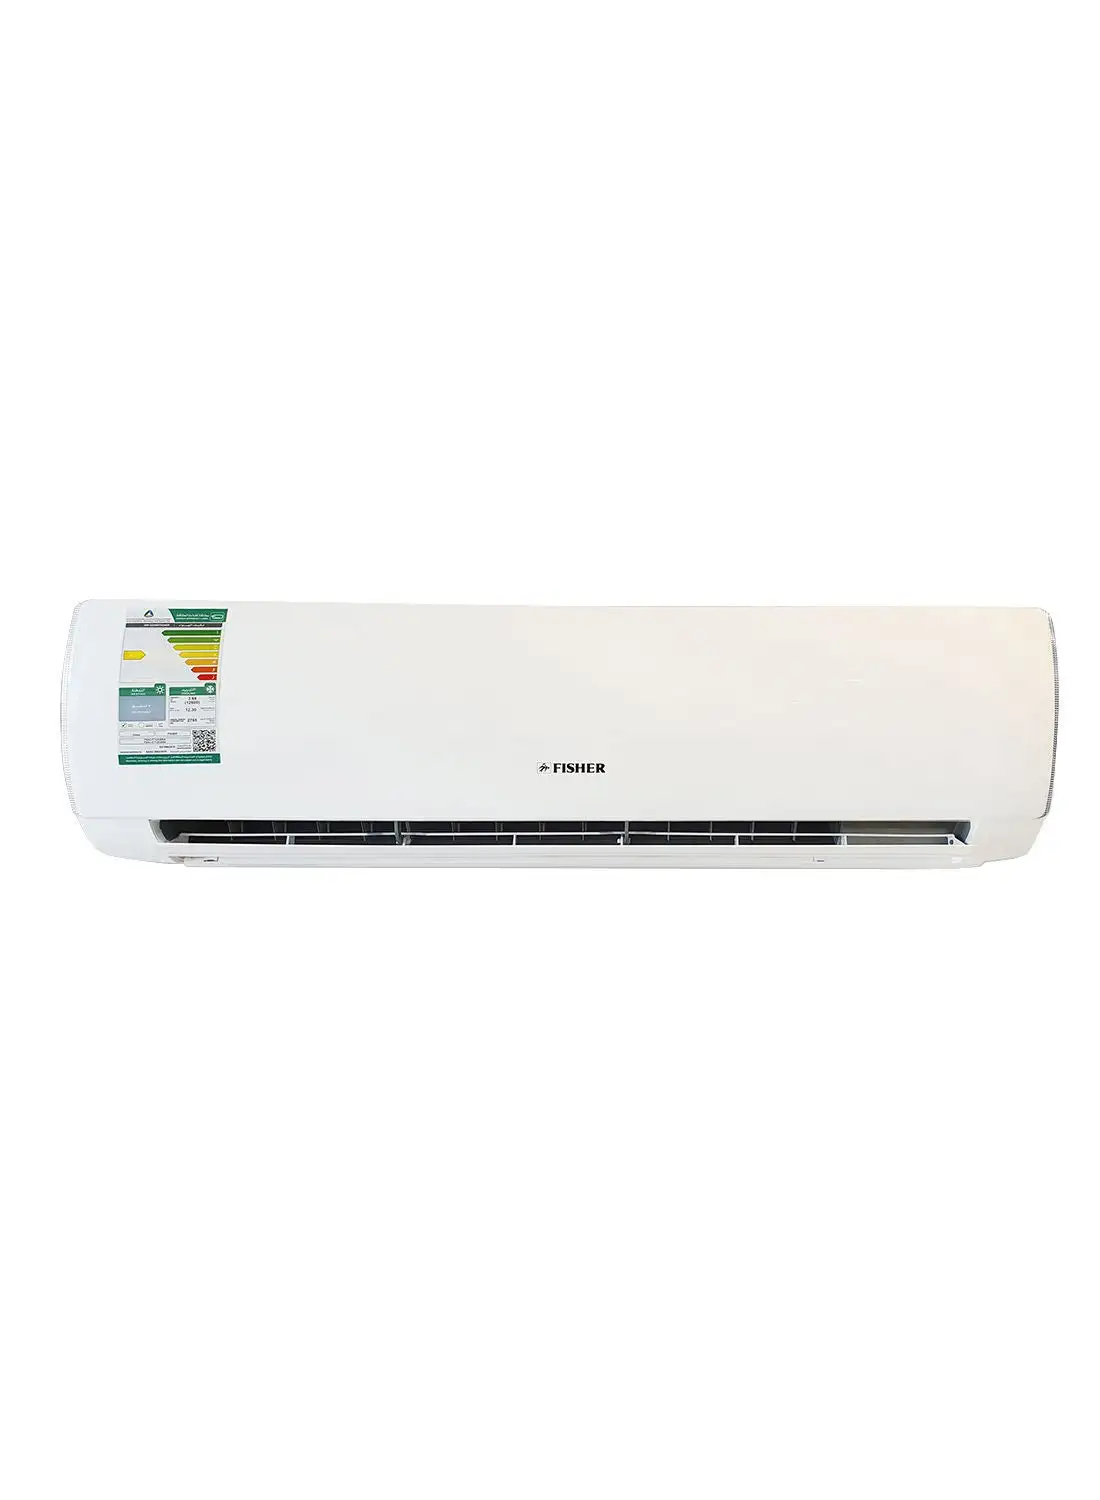 FISHER Split Air Conditioner (2.60 Tons) 31200 BTU Cold FSAC-FT36CERAN1 , With WIFI, ( 2022 Model )